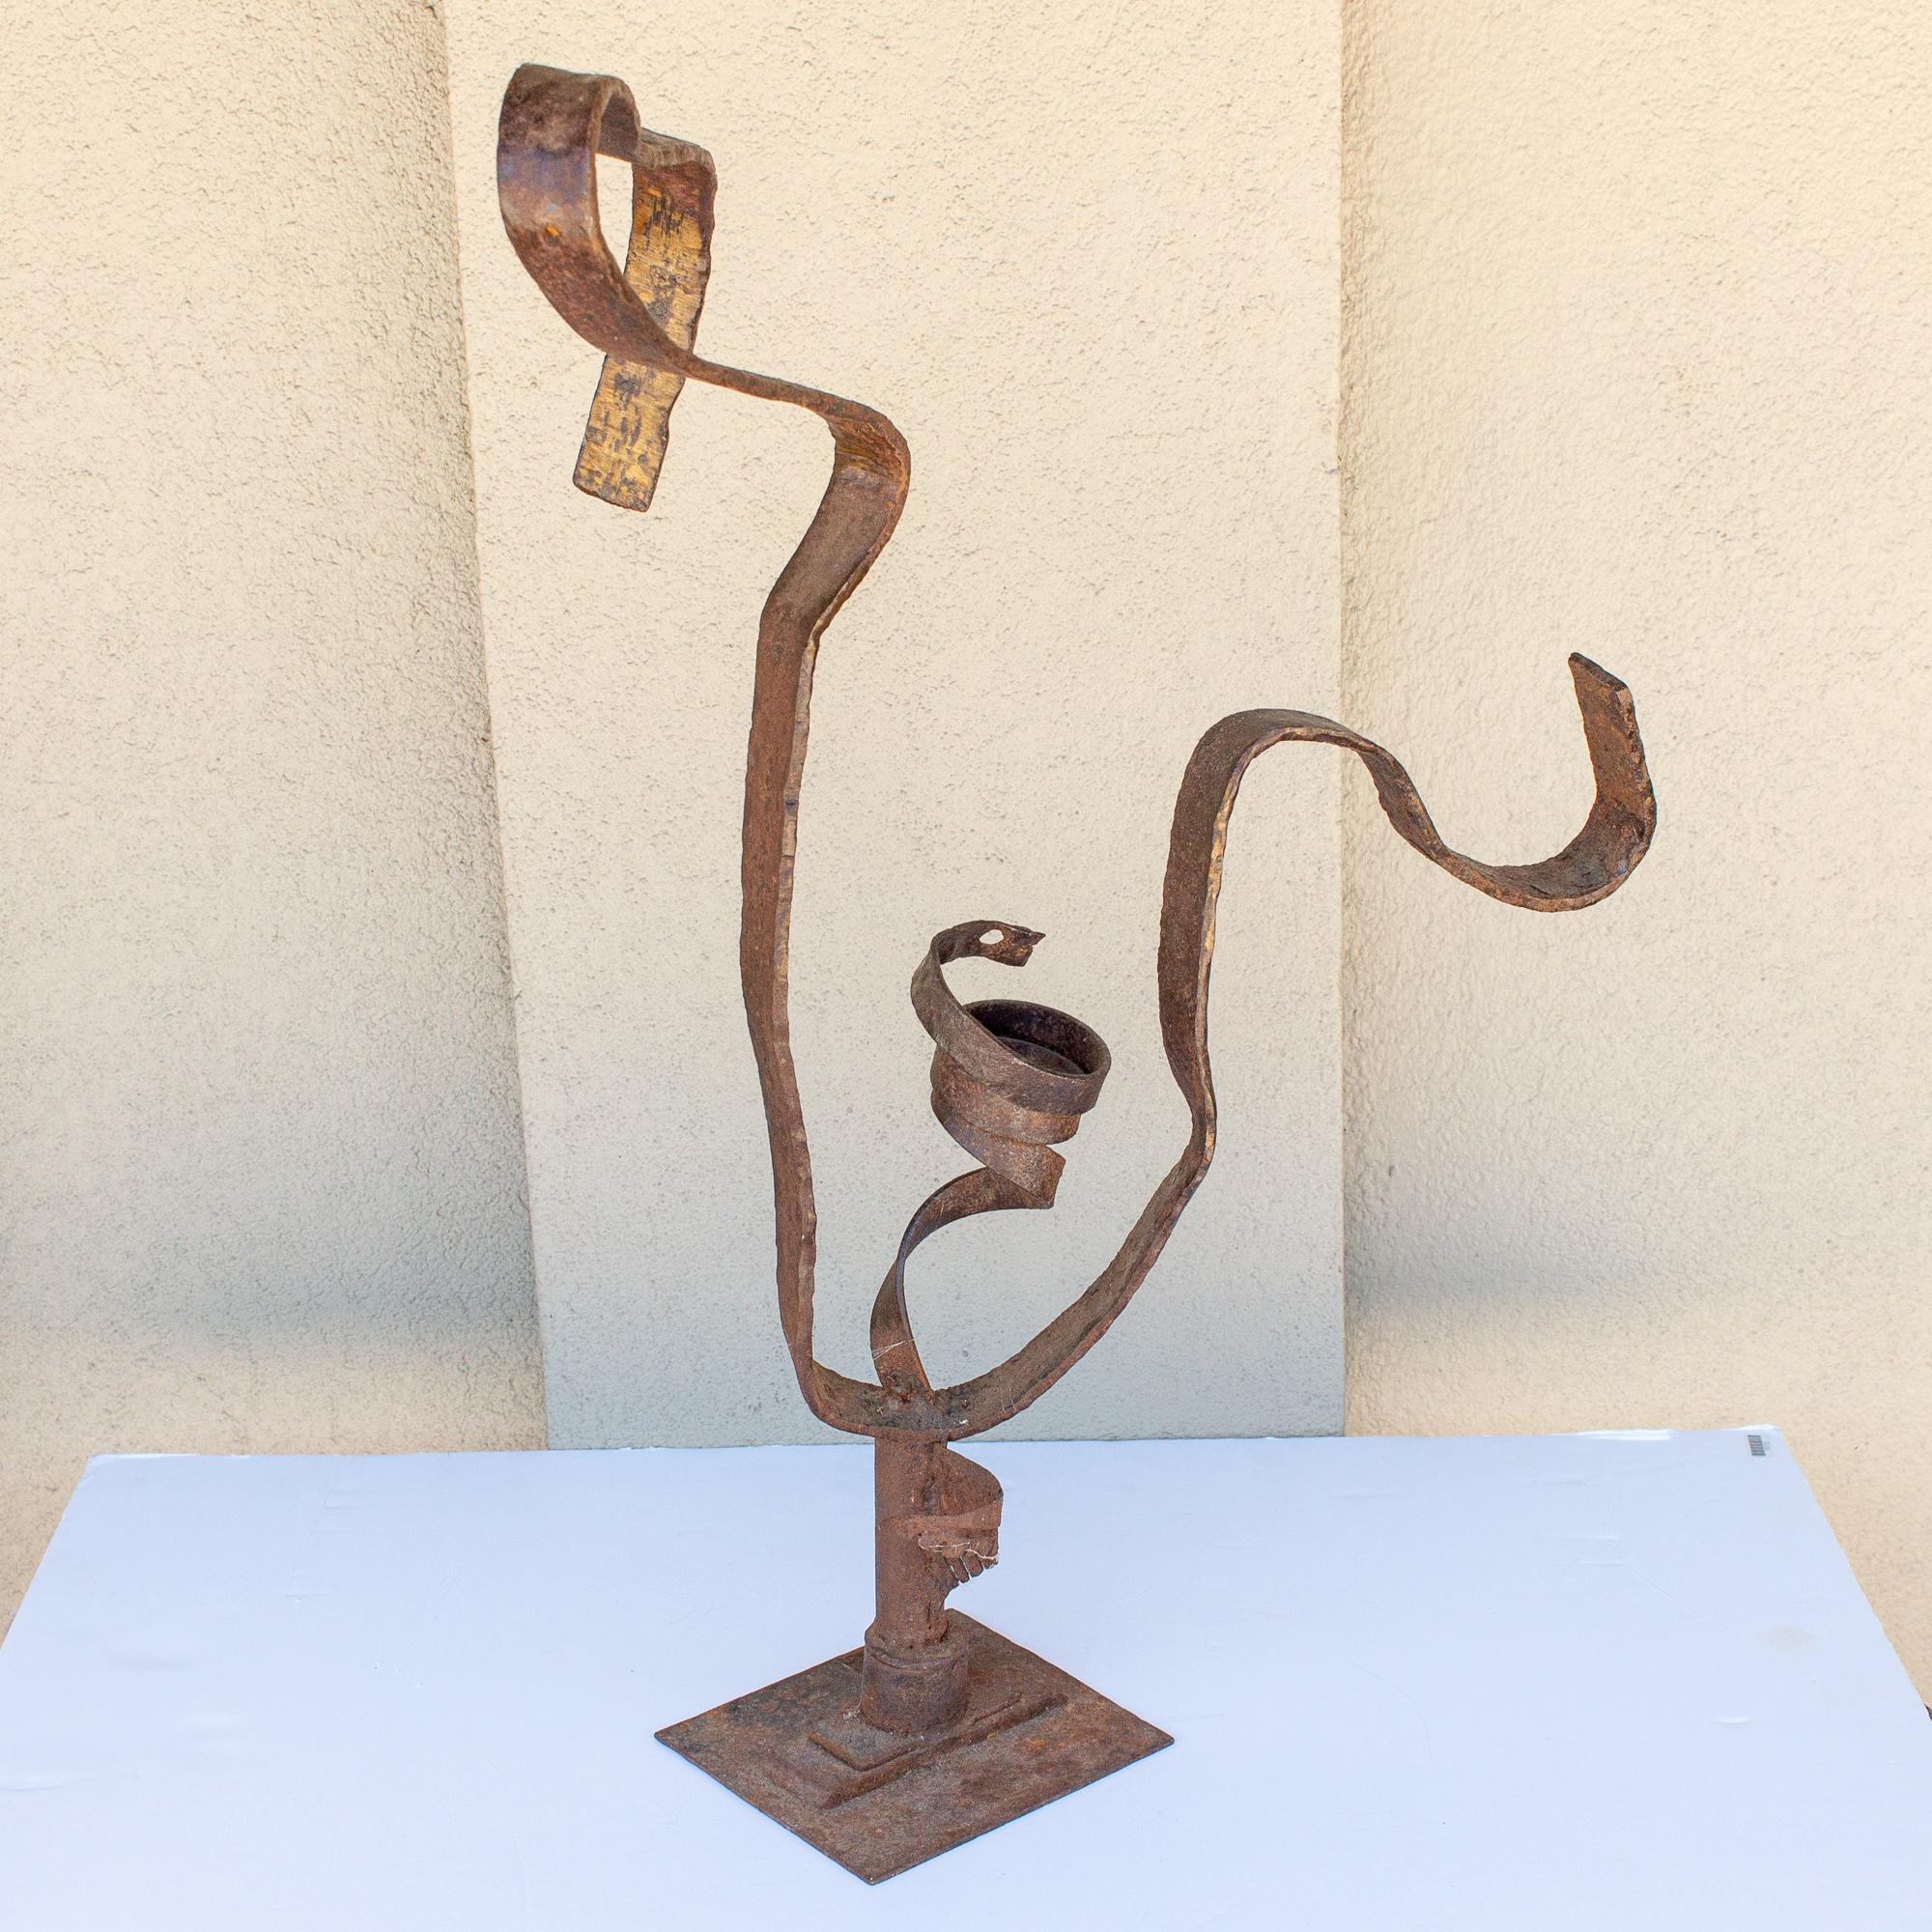 French Midcentury Abstract Iron Sculpture found in France